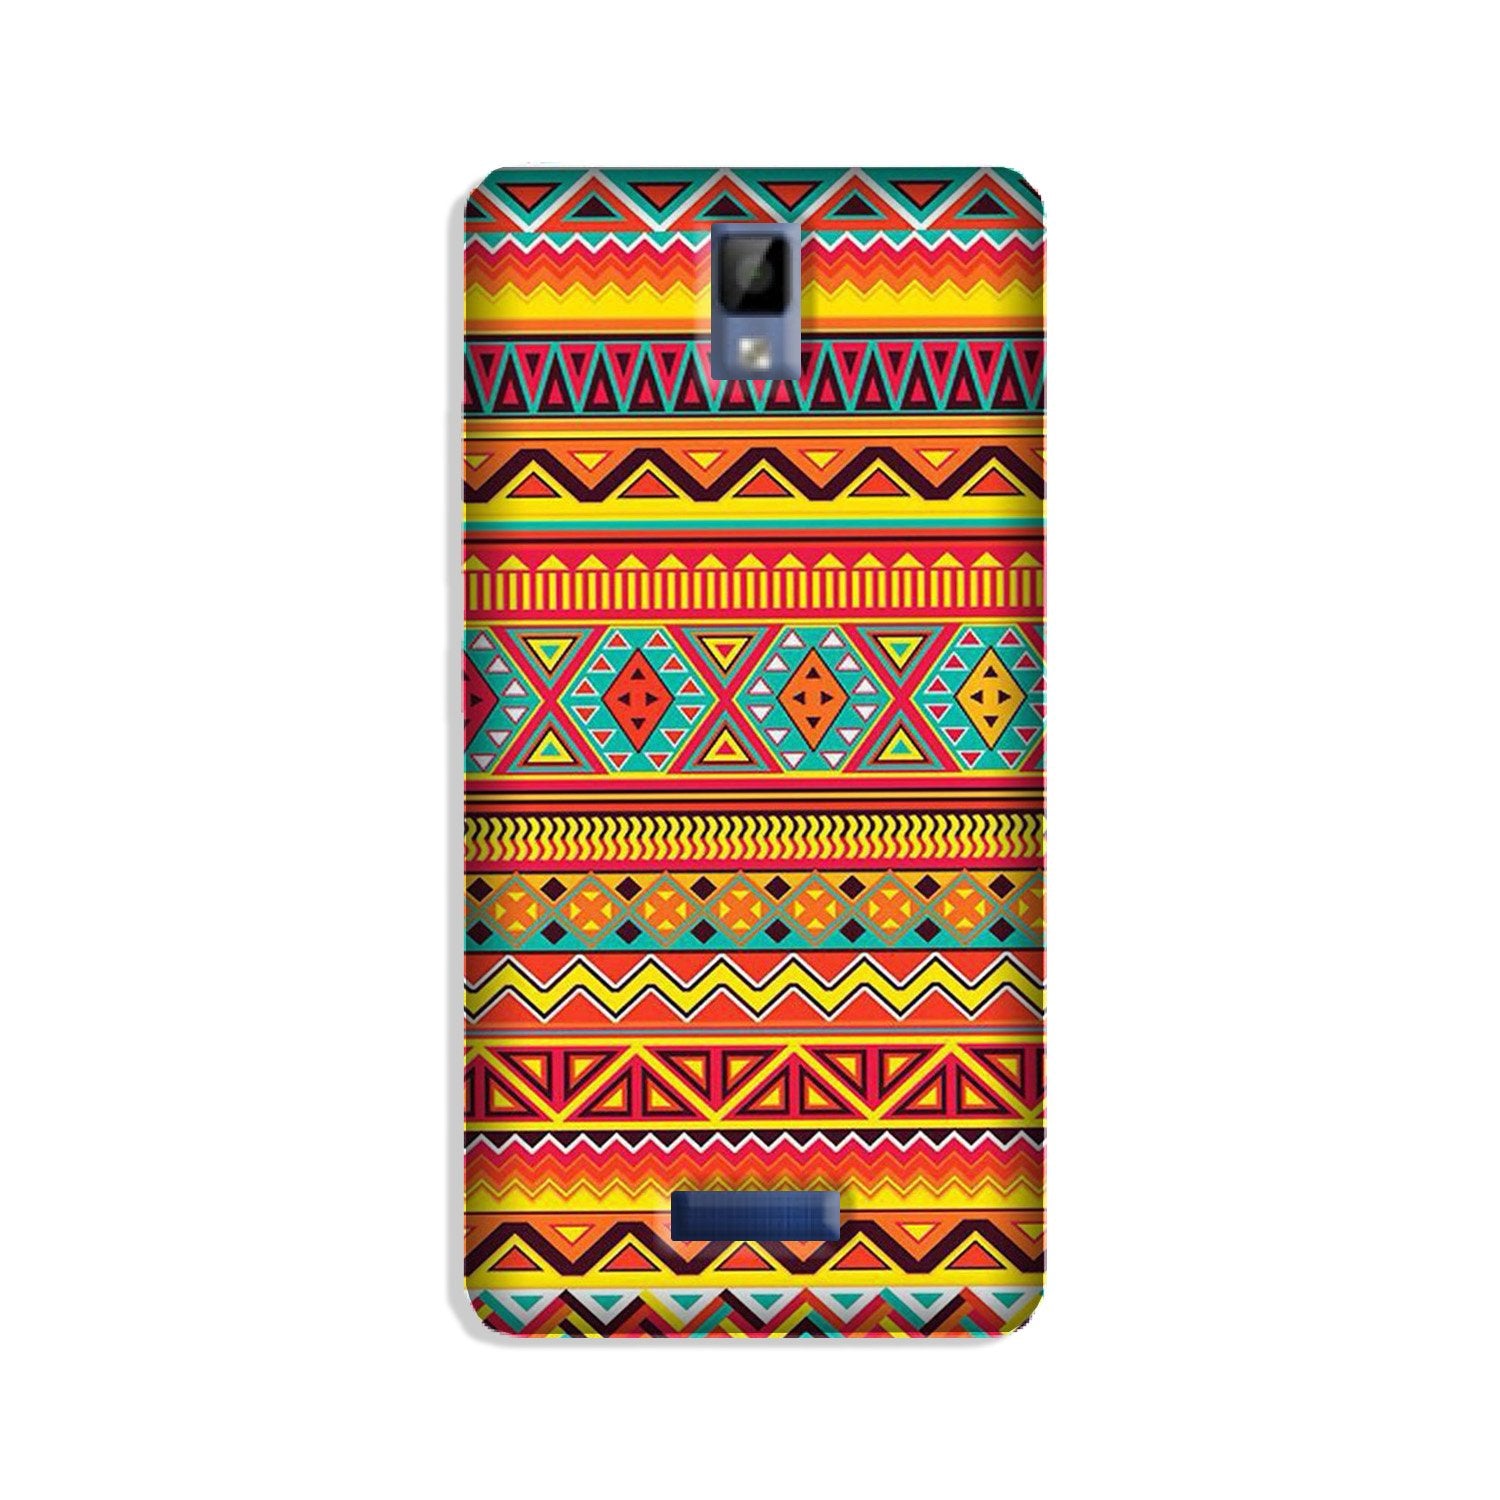 Zigzag line pattern Case for Gionee P7